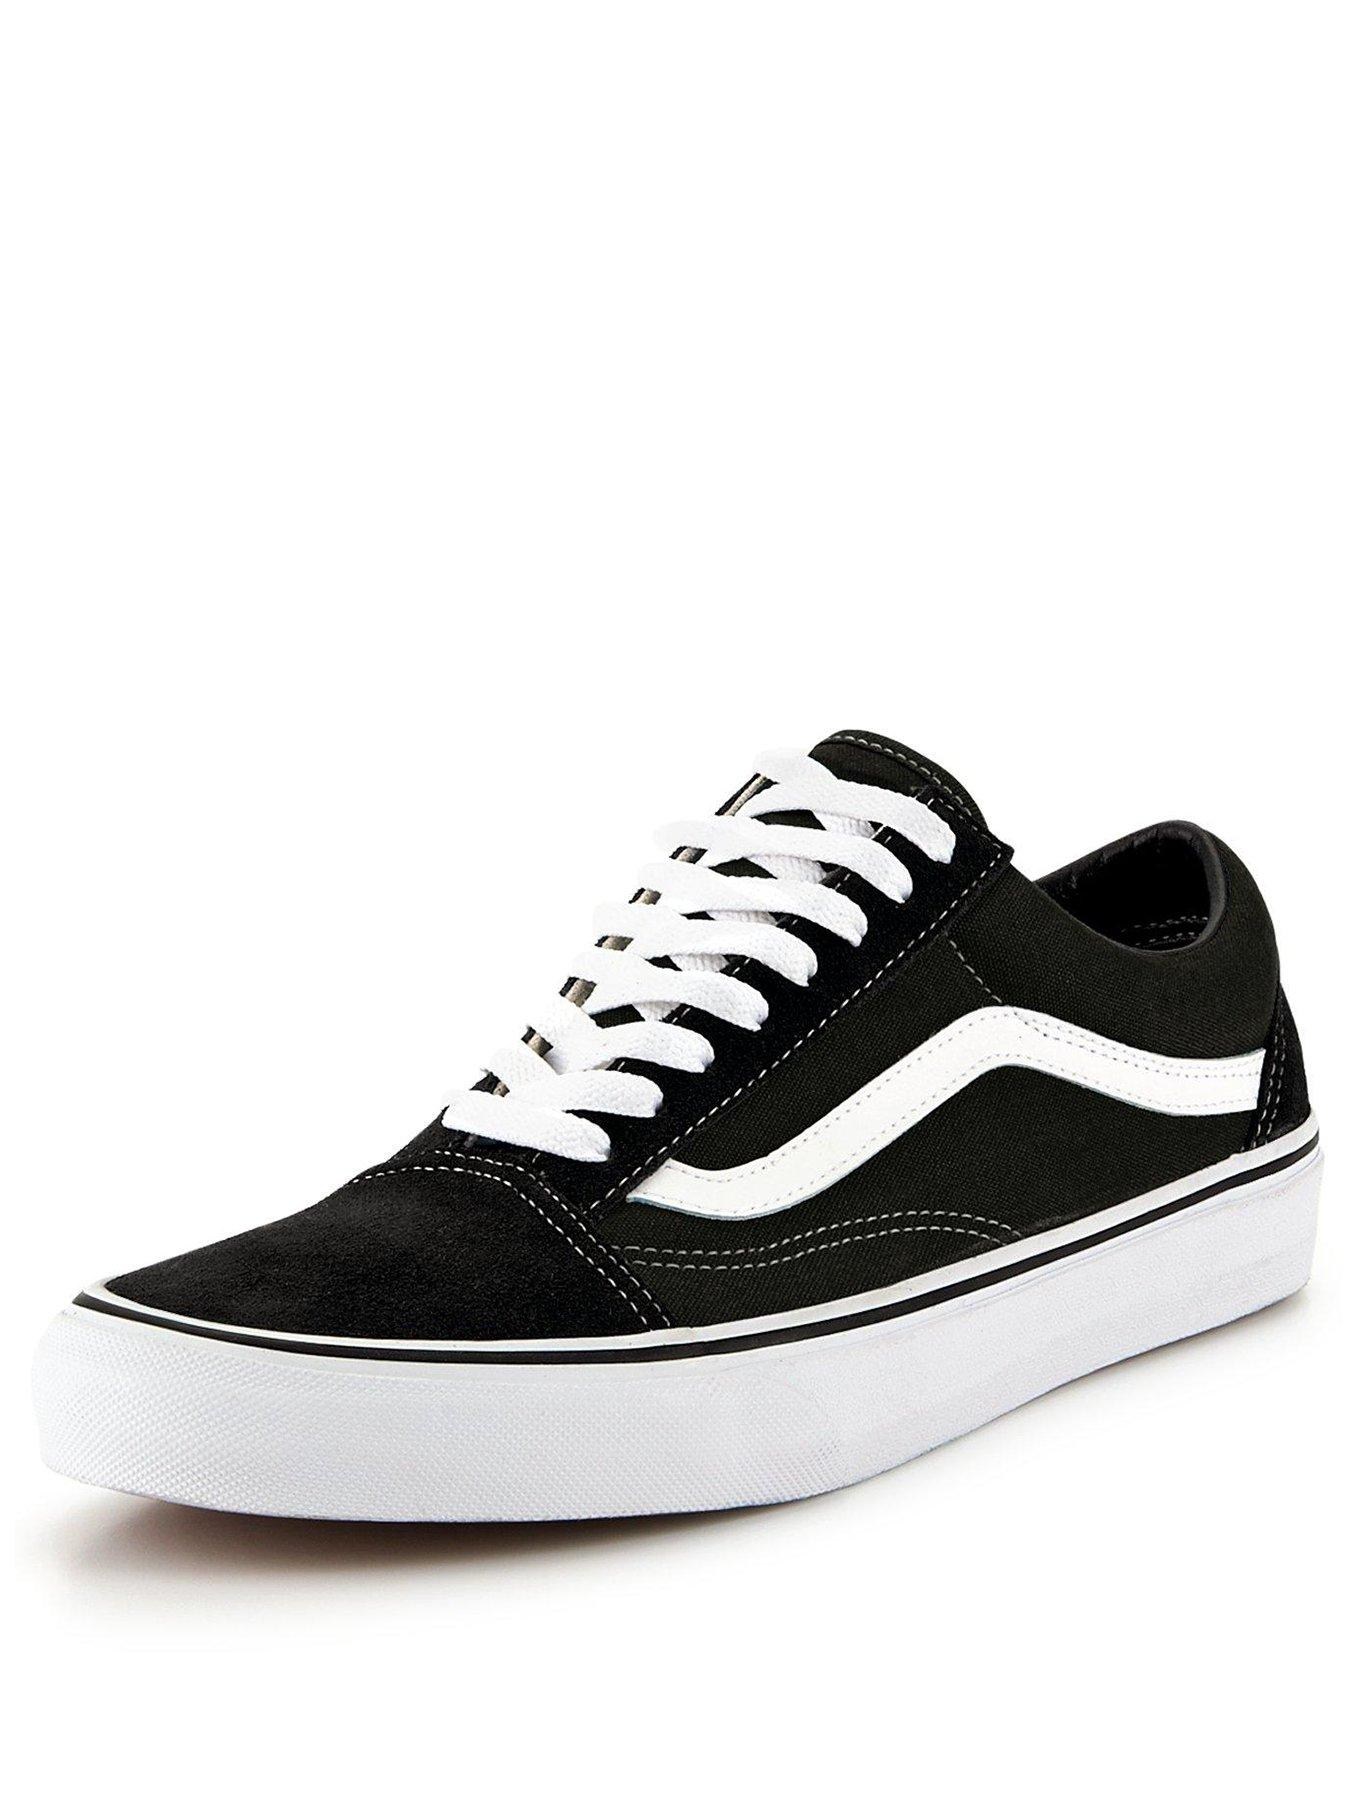 black and white plimsolls womens